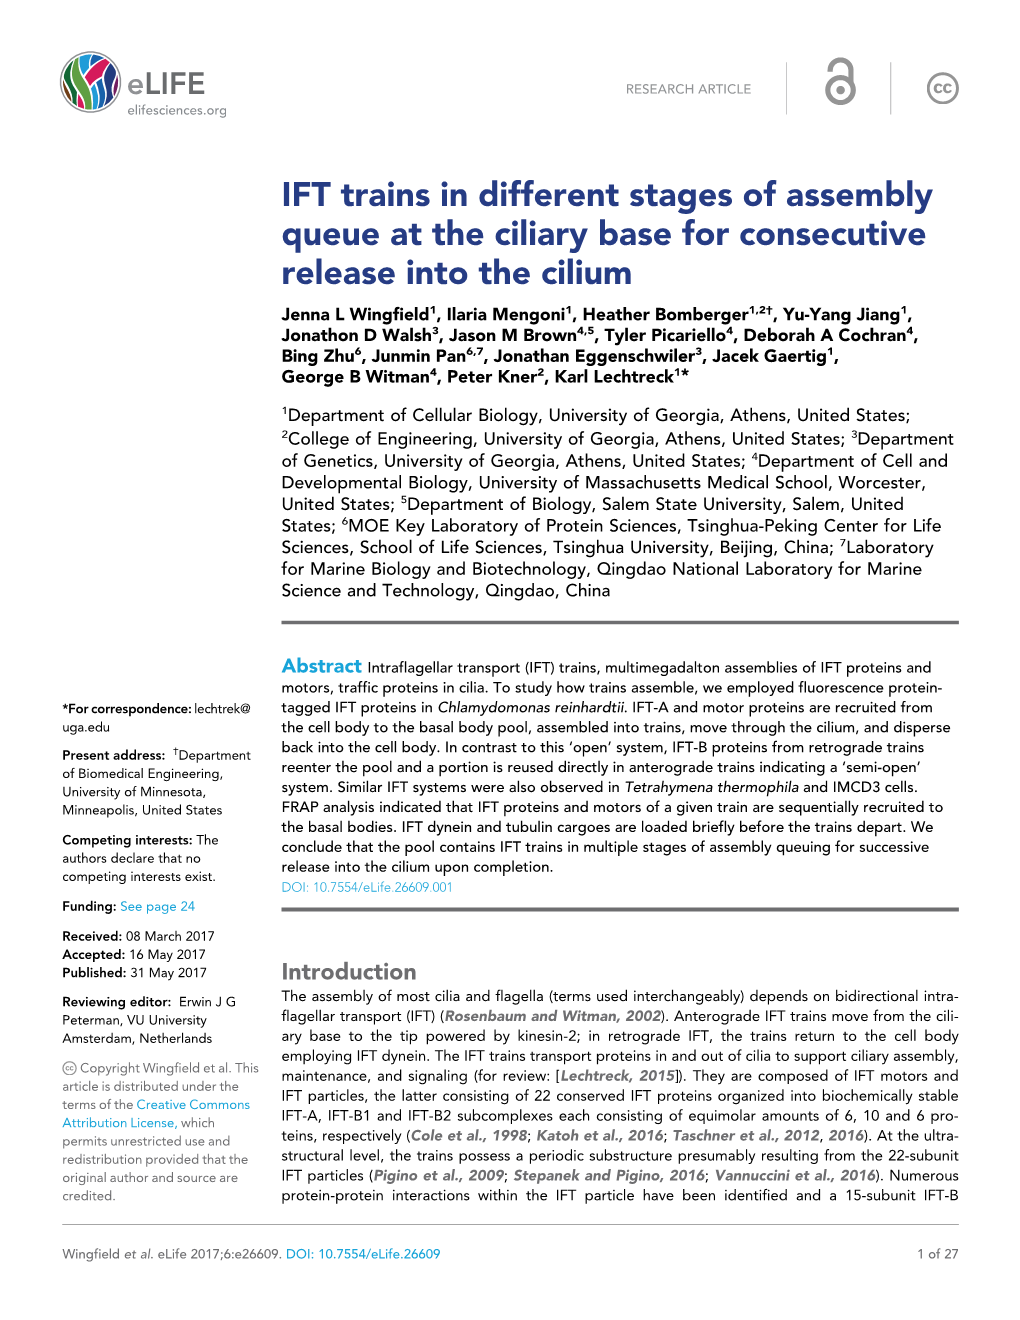 IFT Trains in Different Stages of Assembly Queue at the Ciliary Base